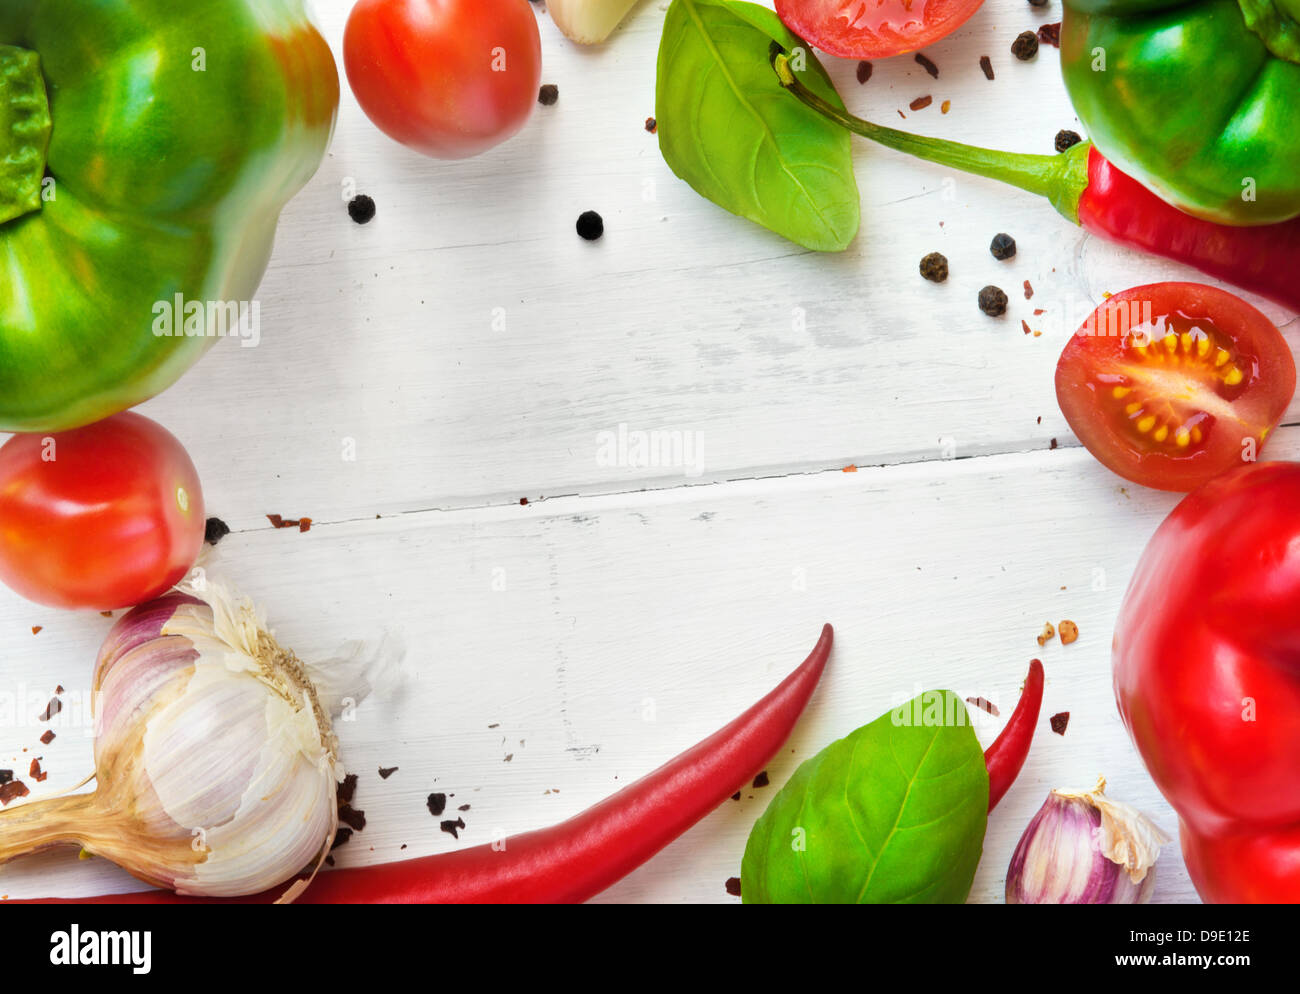 Vegetable frame on the white wooden board ( Red and green bell peppers, chili peppers, garlic, tomatoes, basil leaves, pepper) Stock Photo